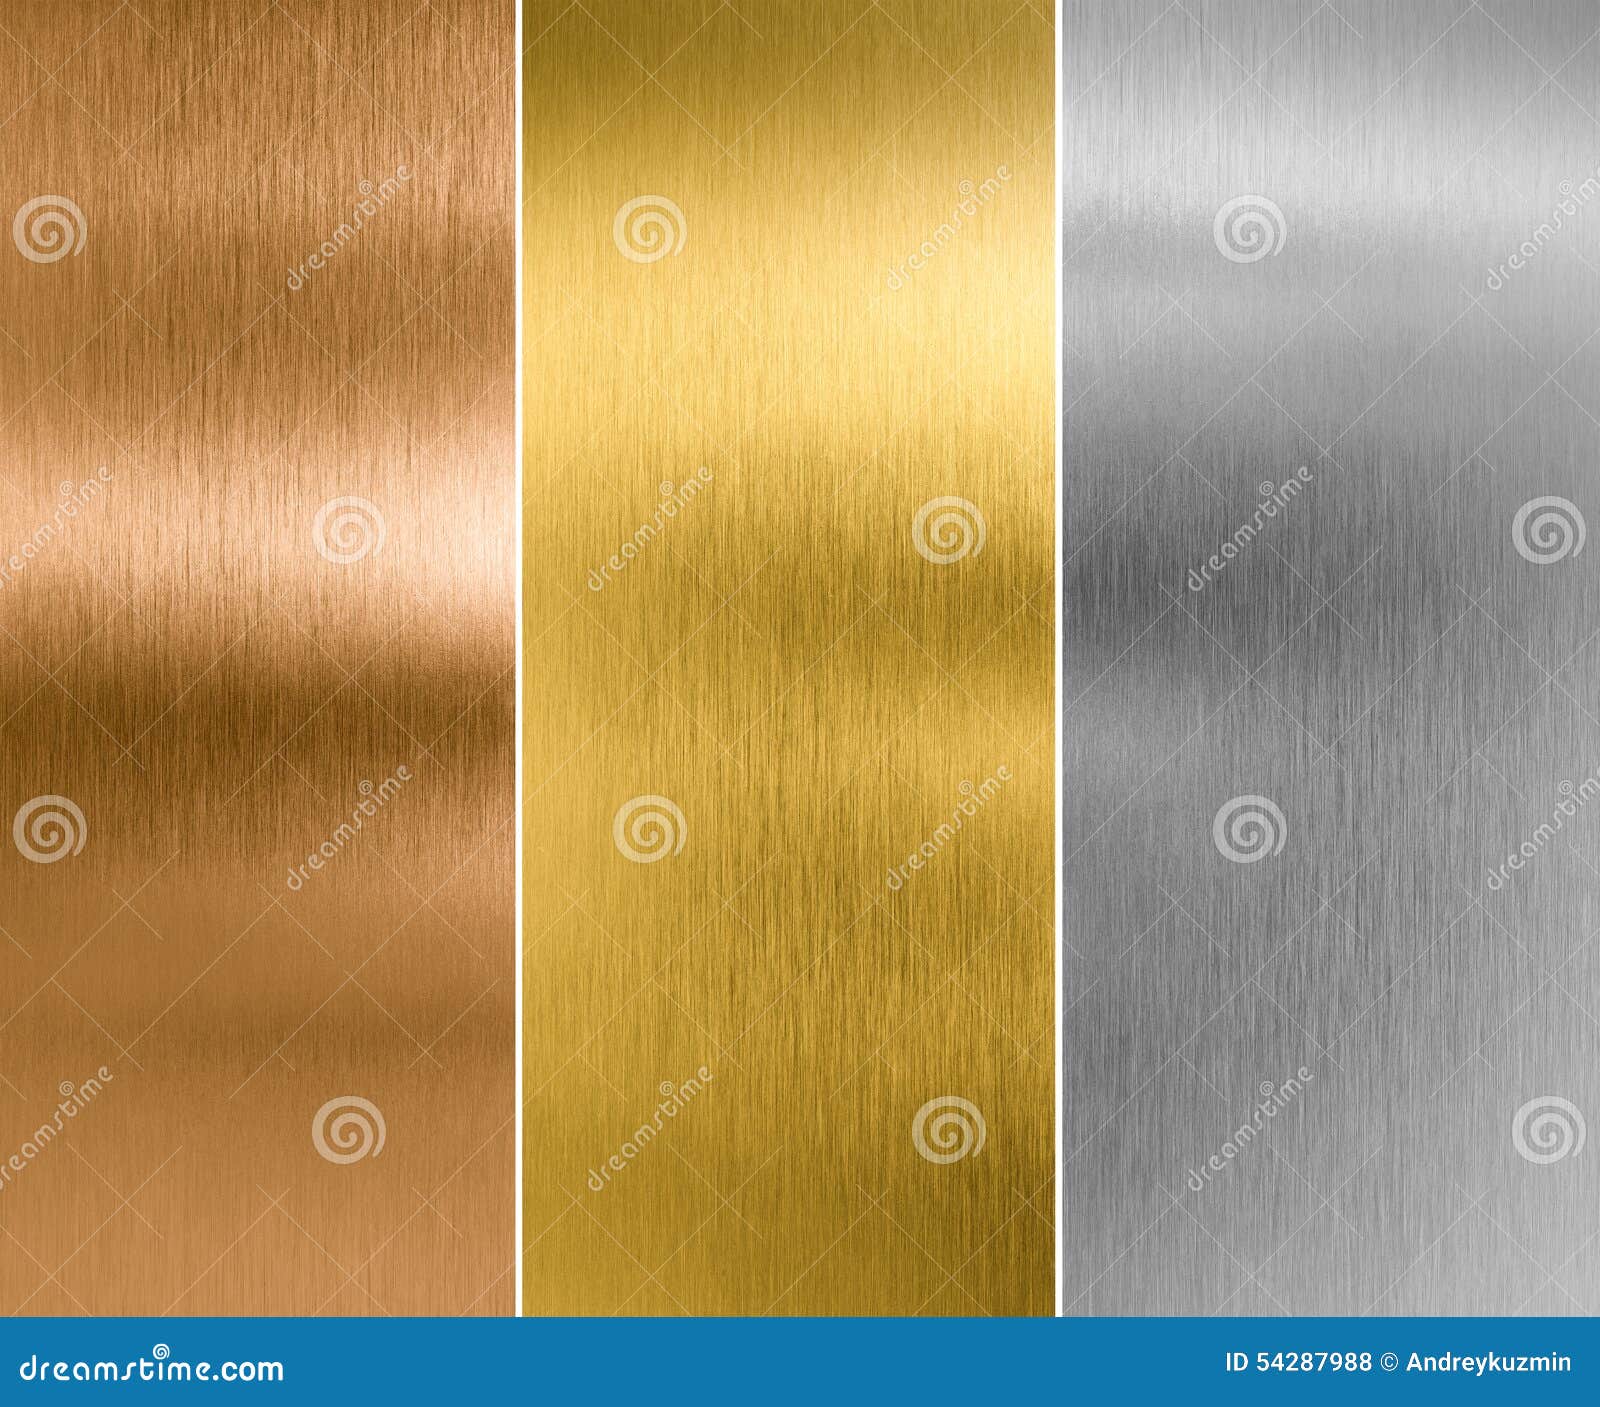 silver, gold and bronze metal texture backgrounds